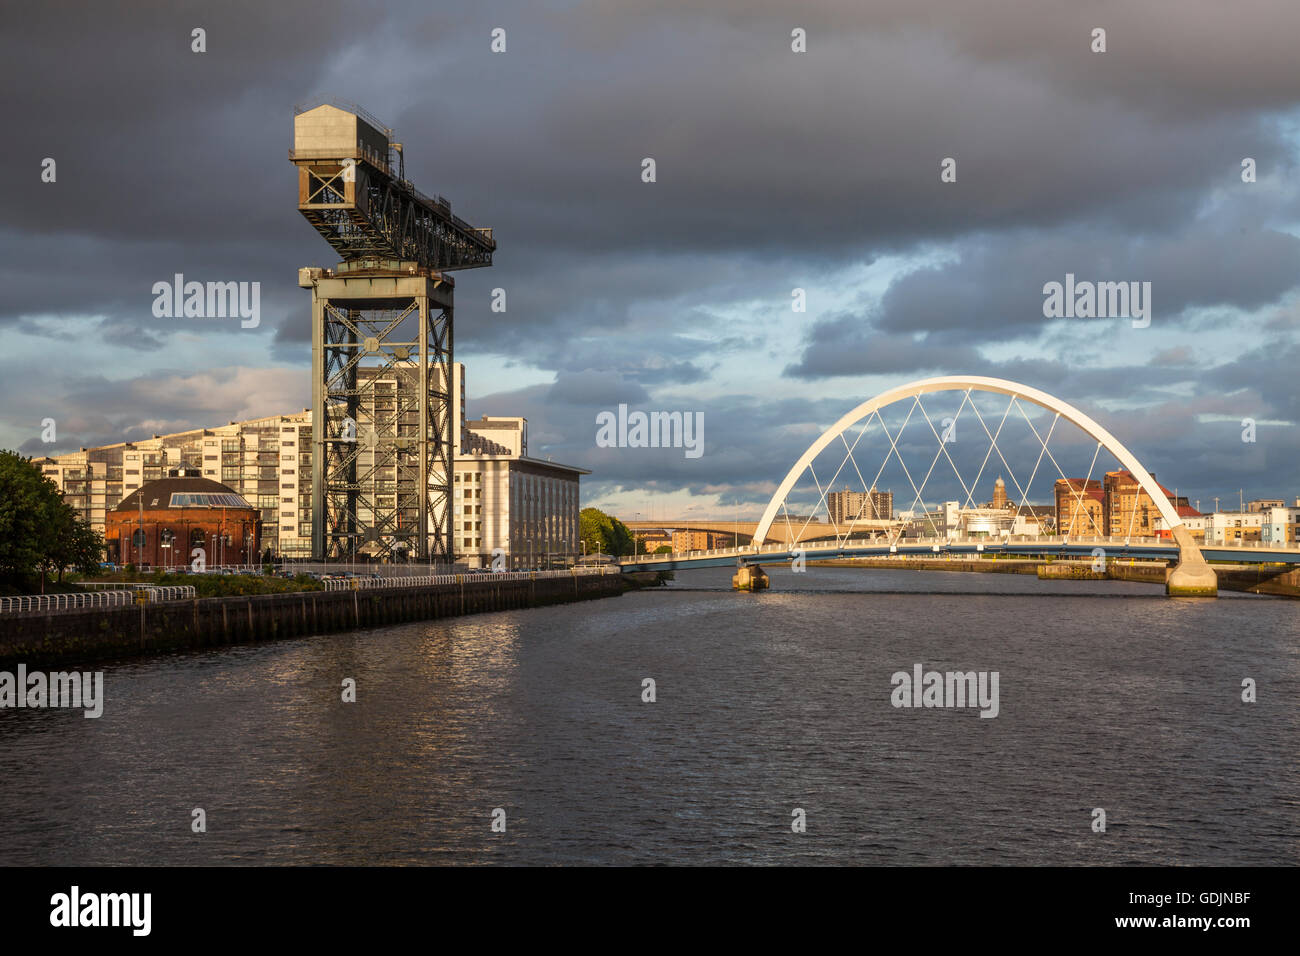 Stormclouds over the River Clyde in Glasgow. Shown in the photo are the 'Squinty Bridge' (Clyde Arc) and the Finnieston Crane. Stock Photo